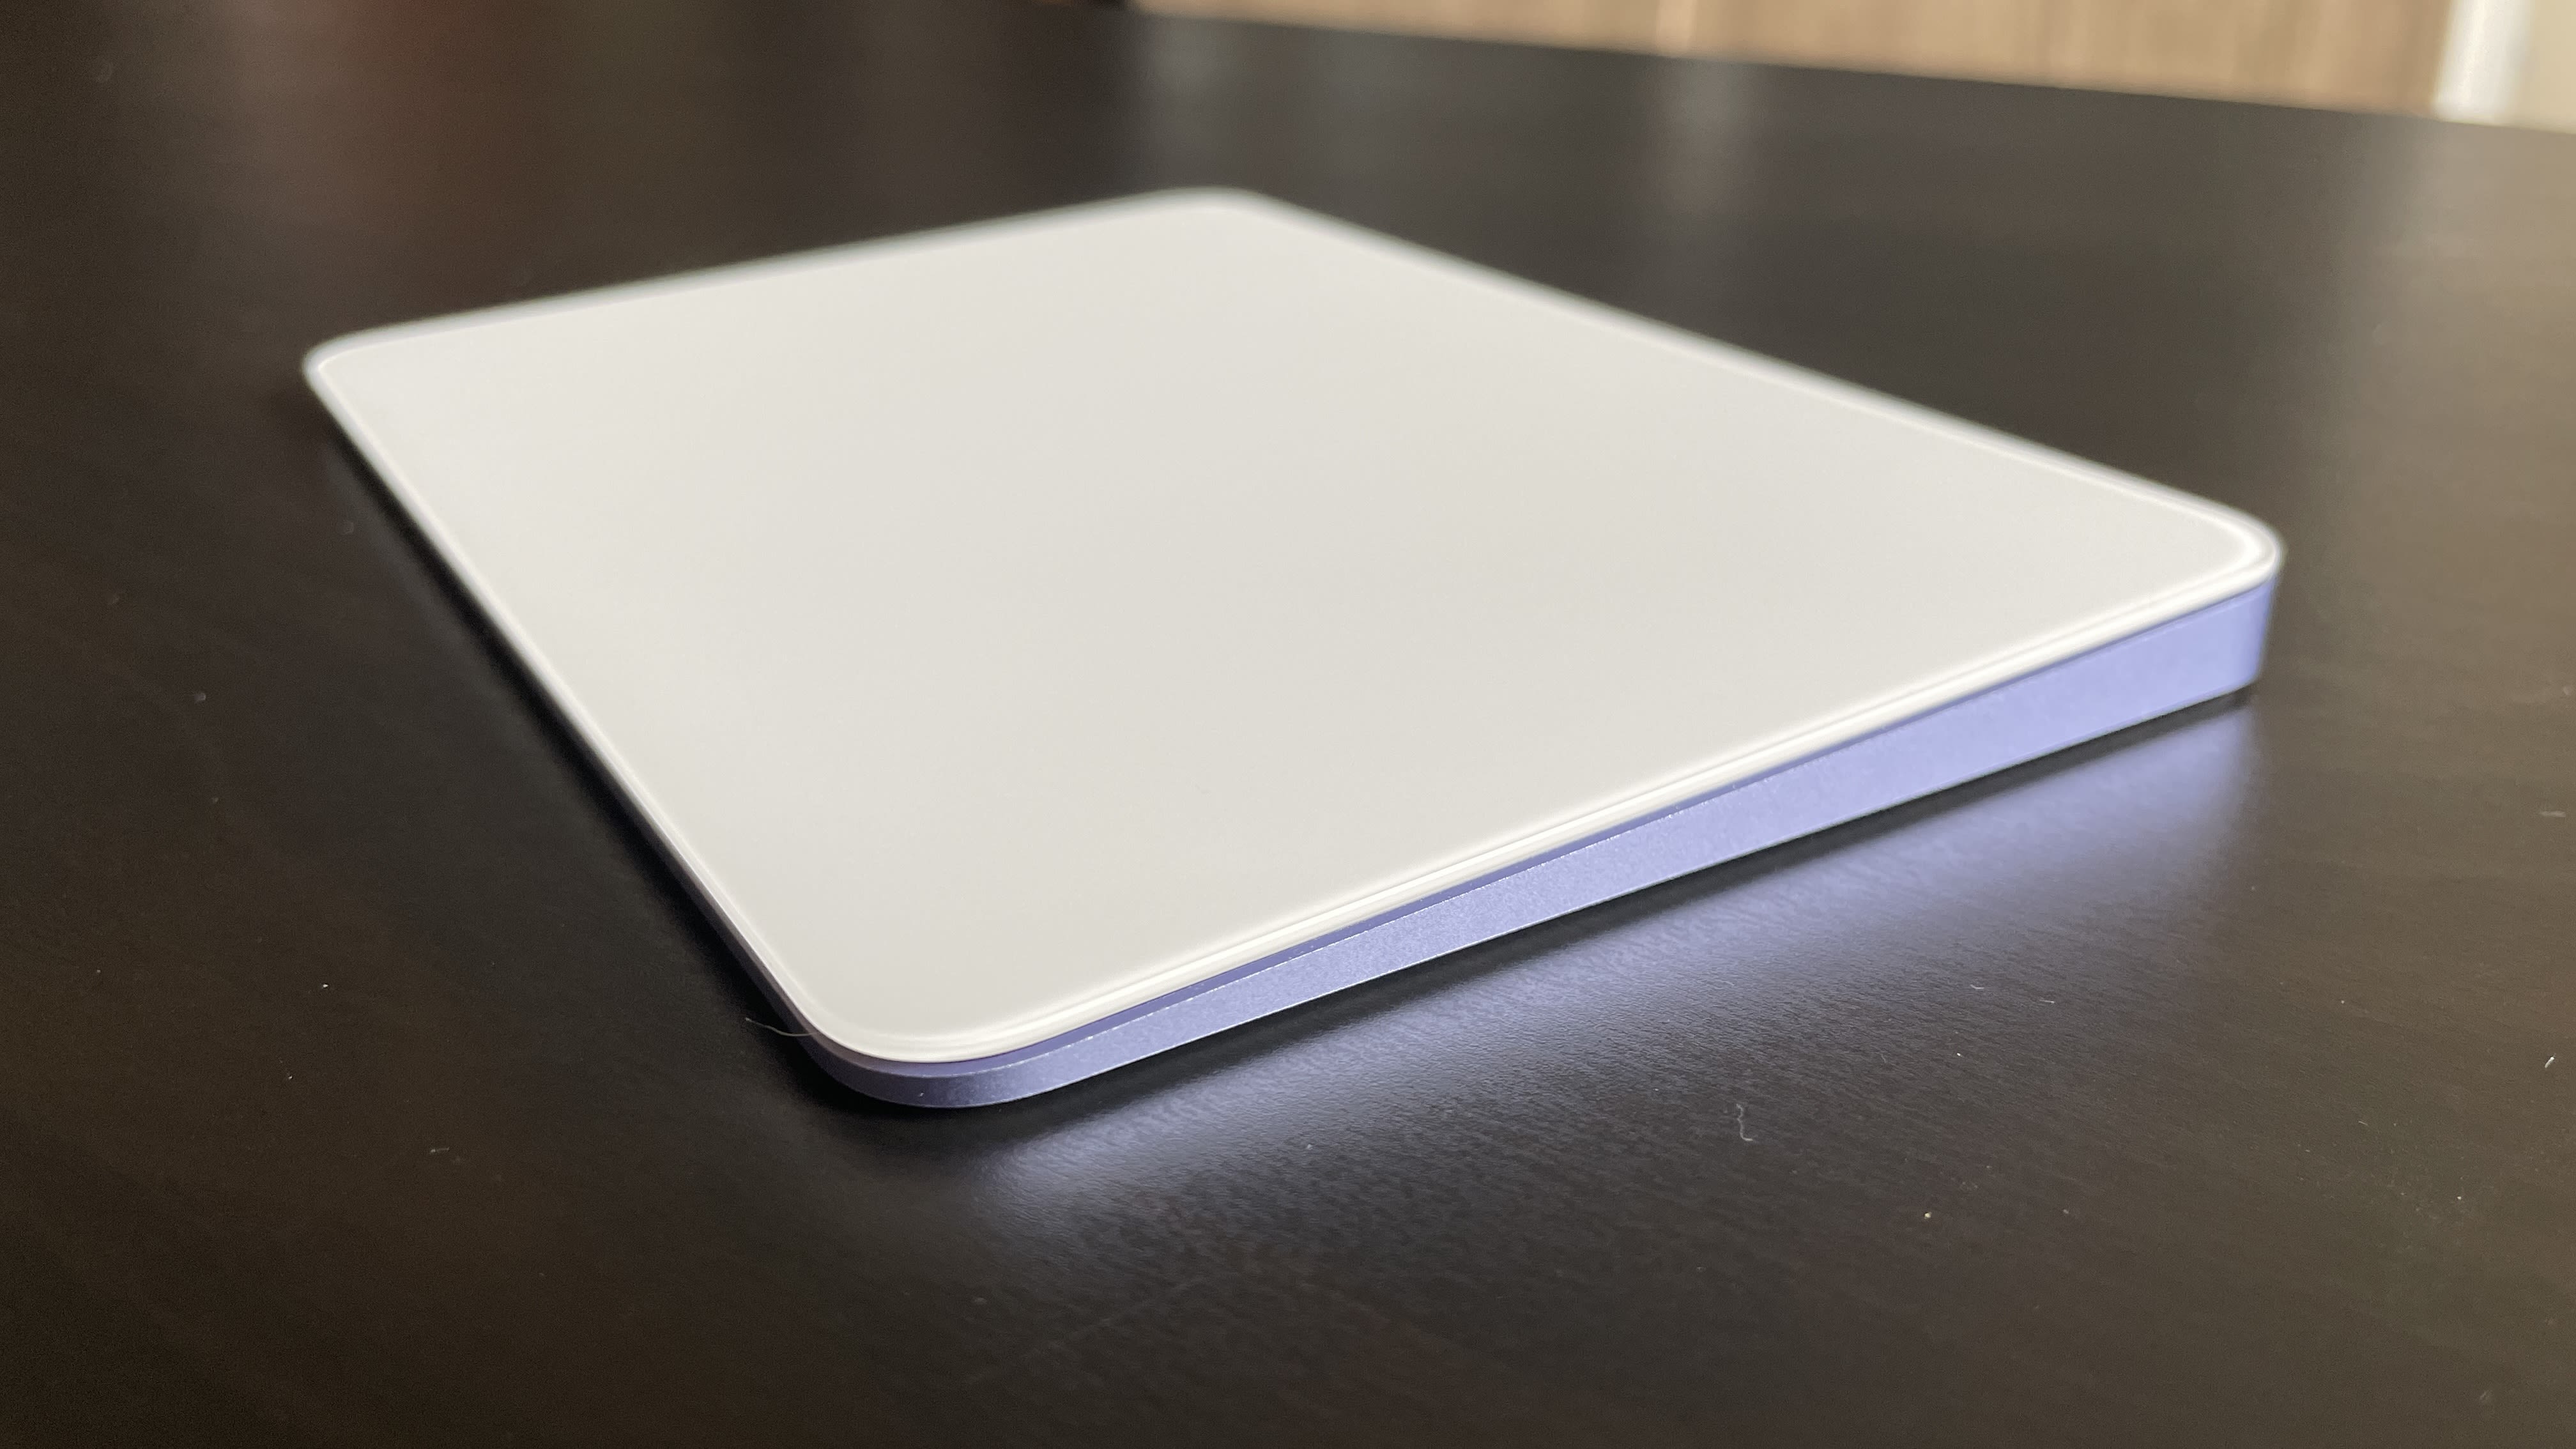 Apple Magic Trackpad 2 review: A must-have for Mac users